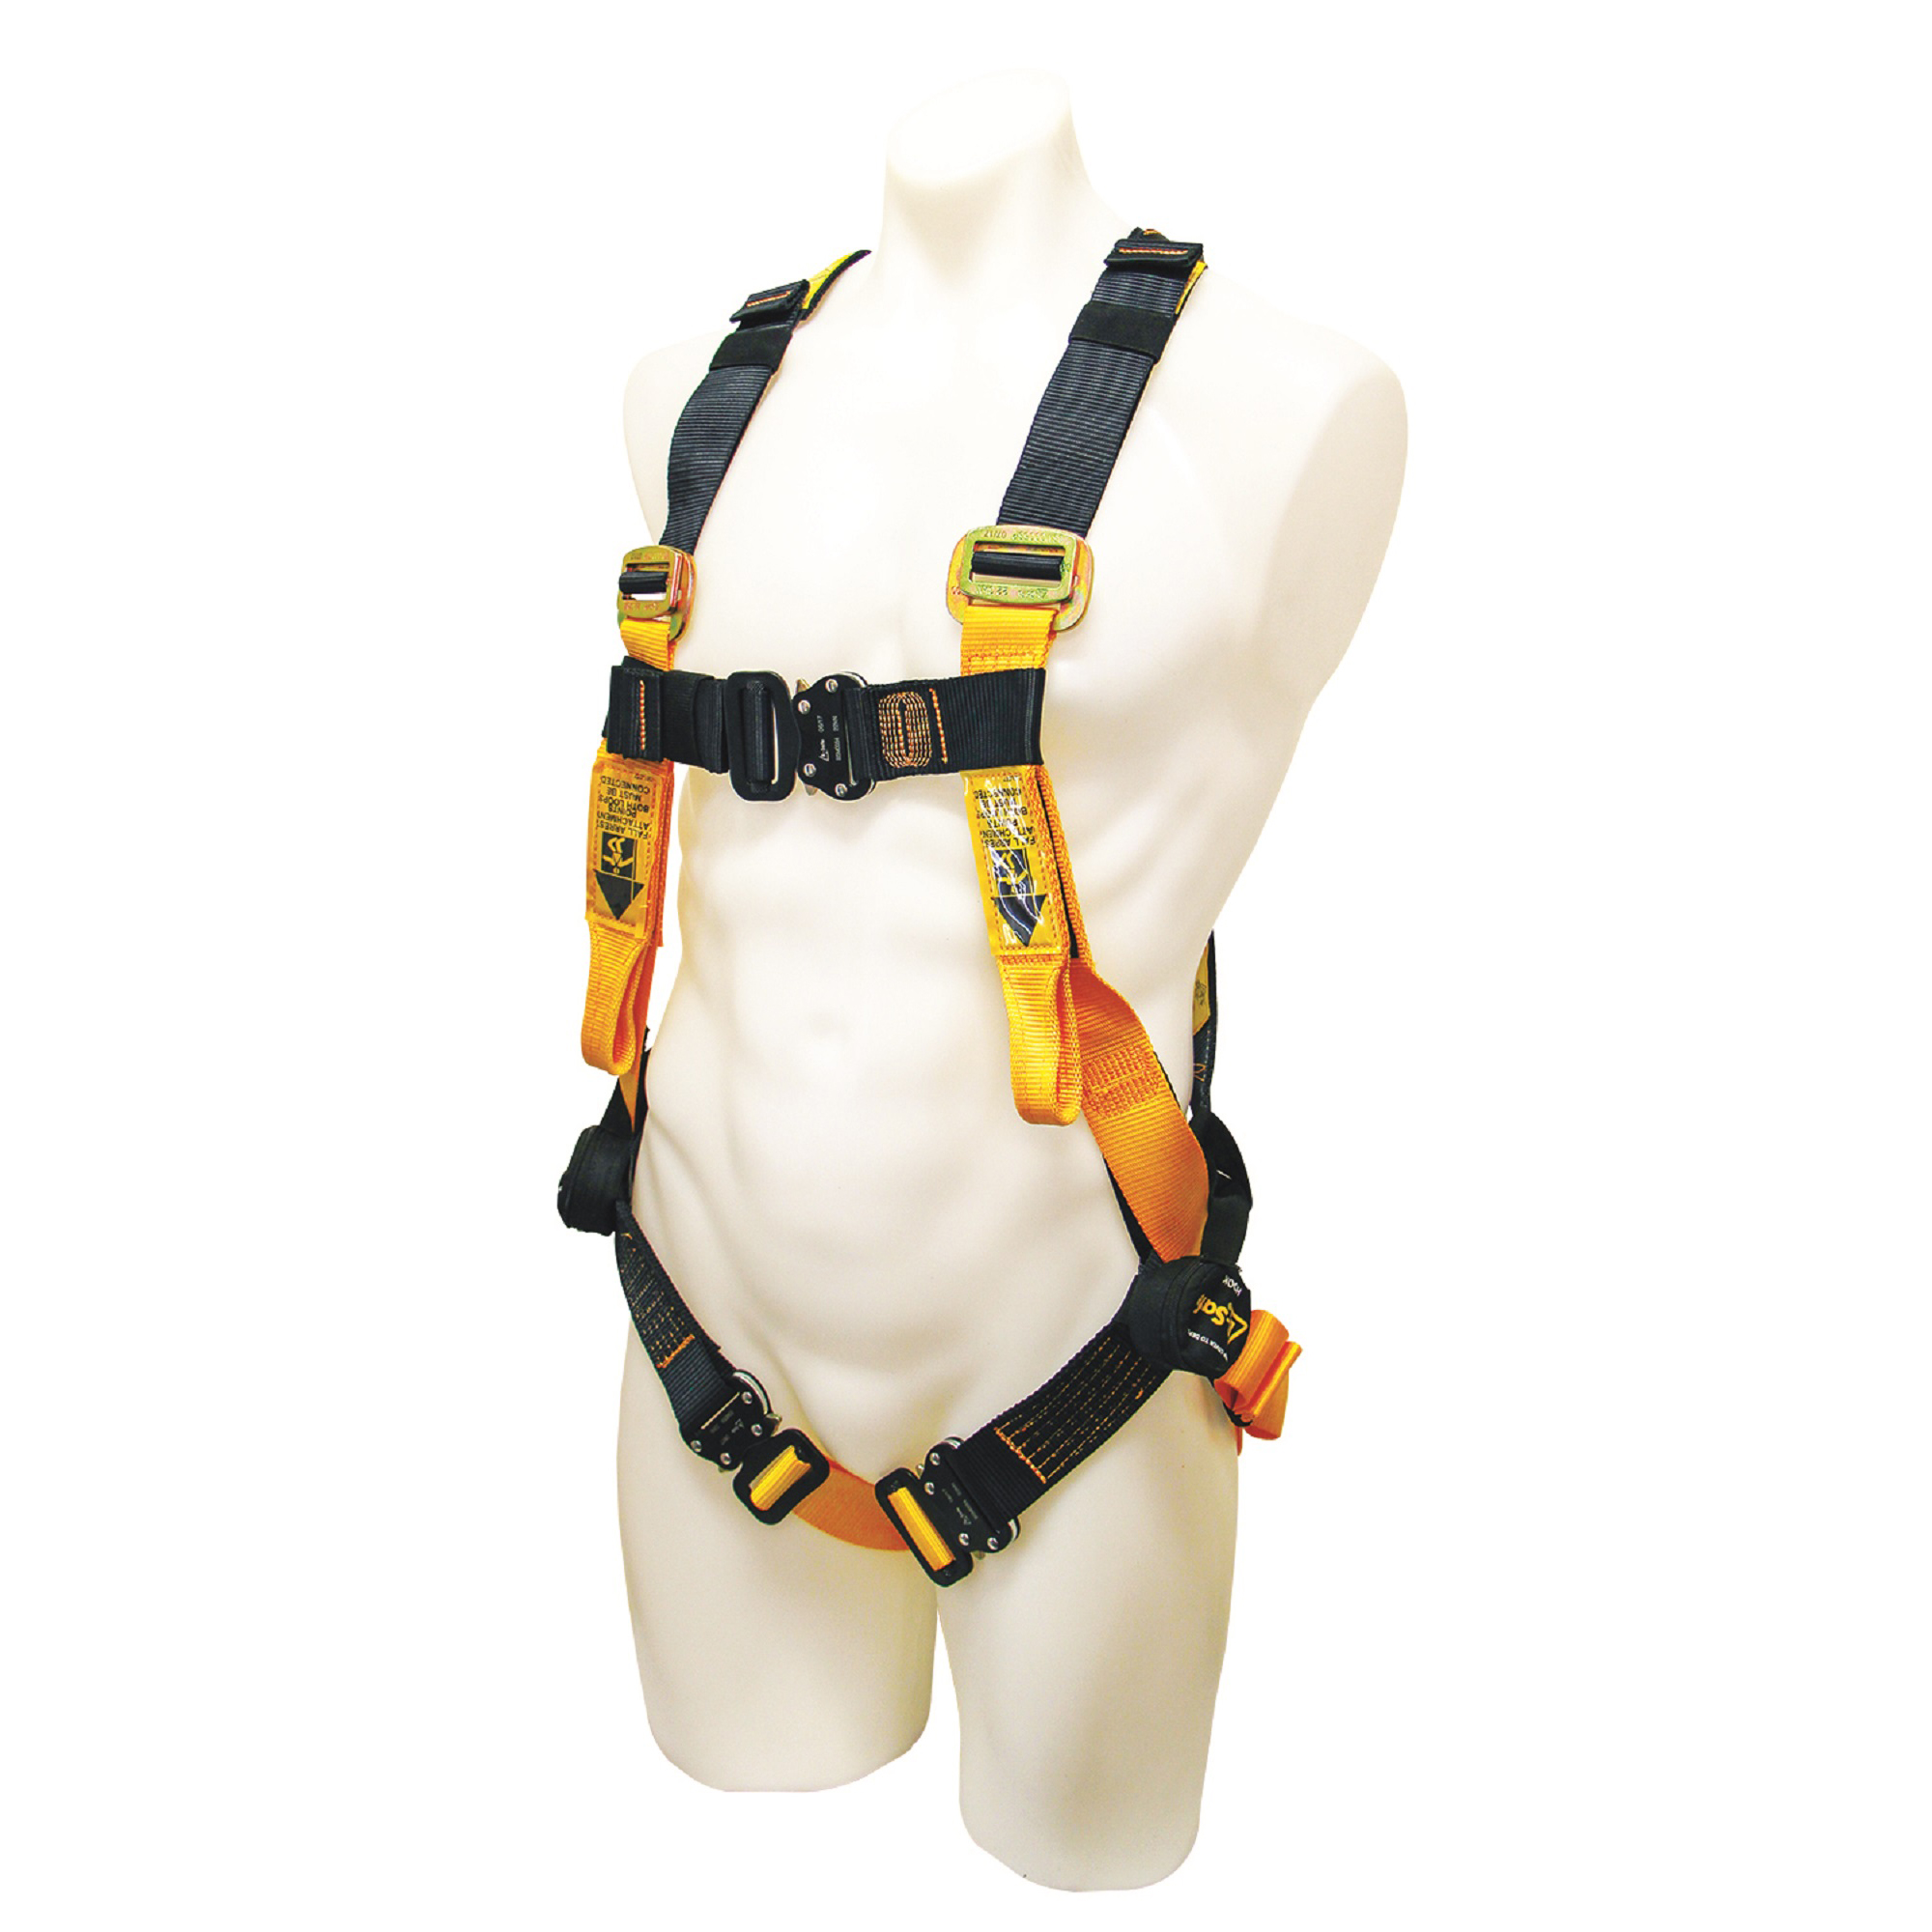 Confined Space Harnesses